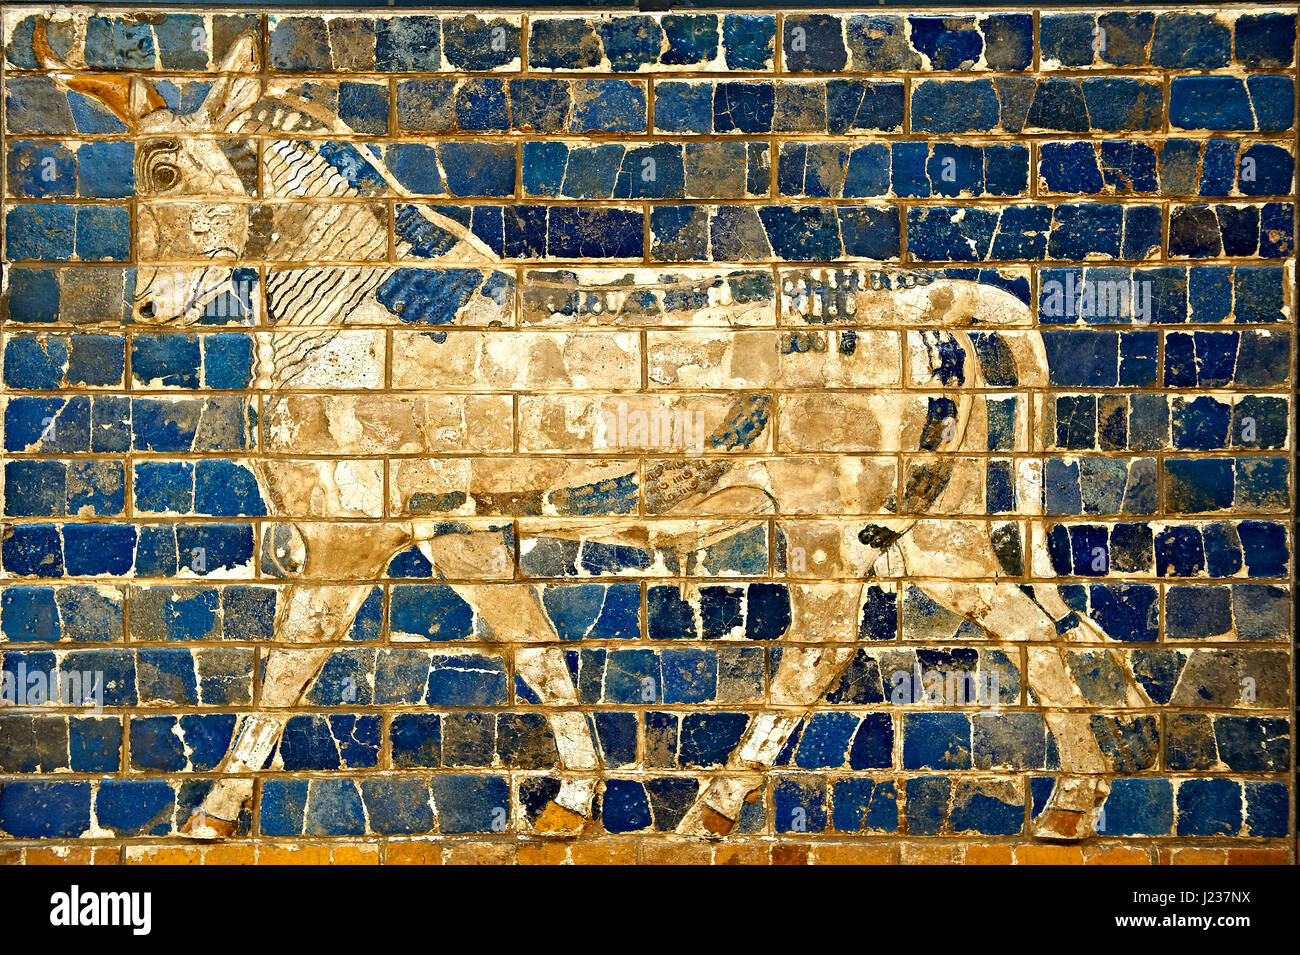 Aurochs relief pictures on glazed bricks from the Ishtar Gate, Babylon, Iraq constructed in about 575 BC,  Istanbul Archaeological Museum. Stock Photo